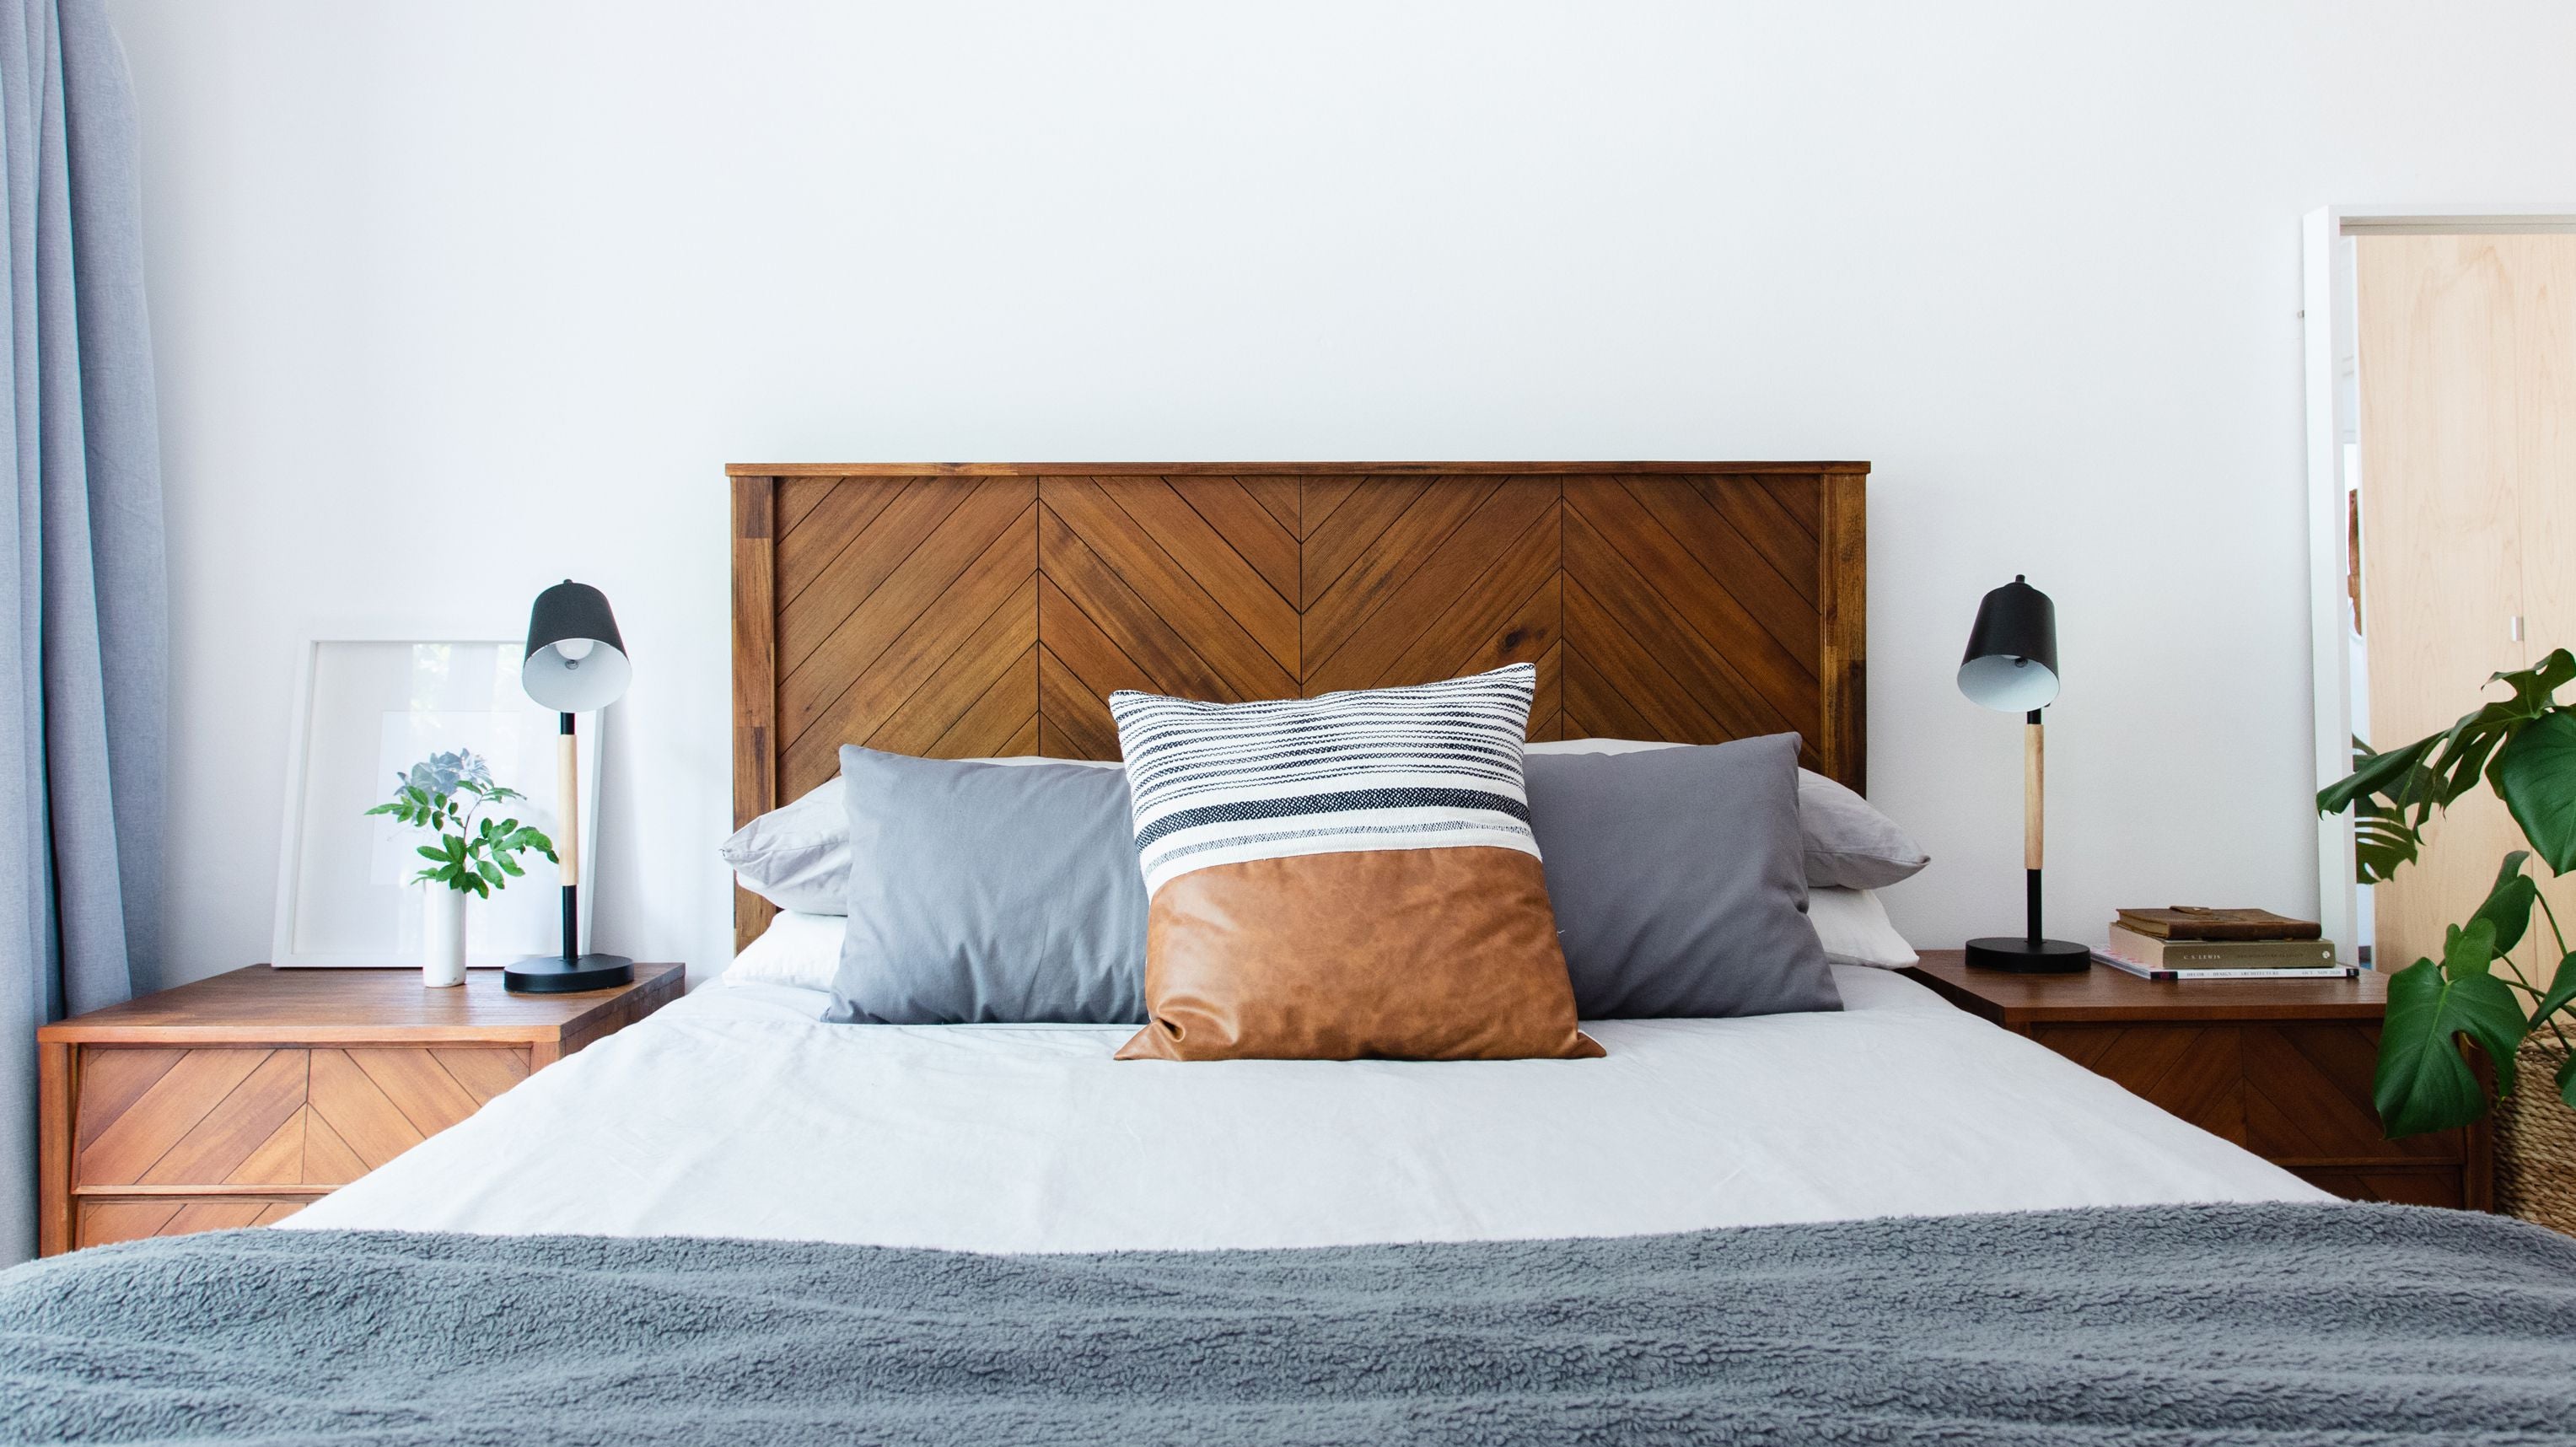 Sleep Tight, Bug-Free Night: A Comprehensive Guide on How to Keep Bed Bugs Away